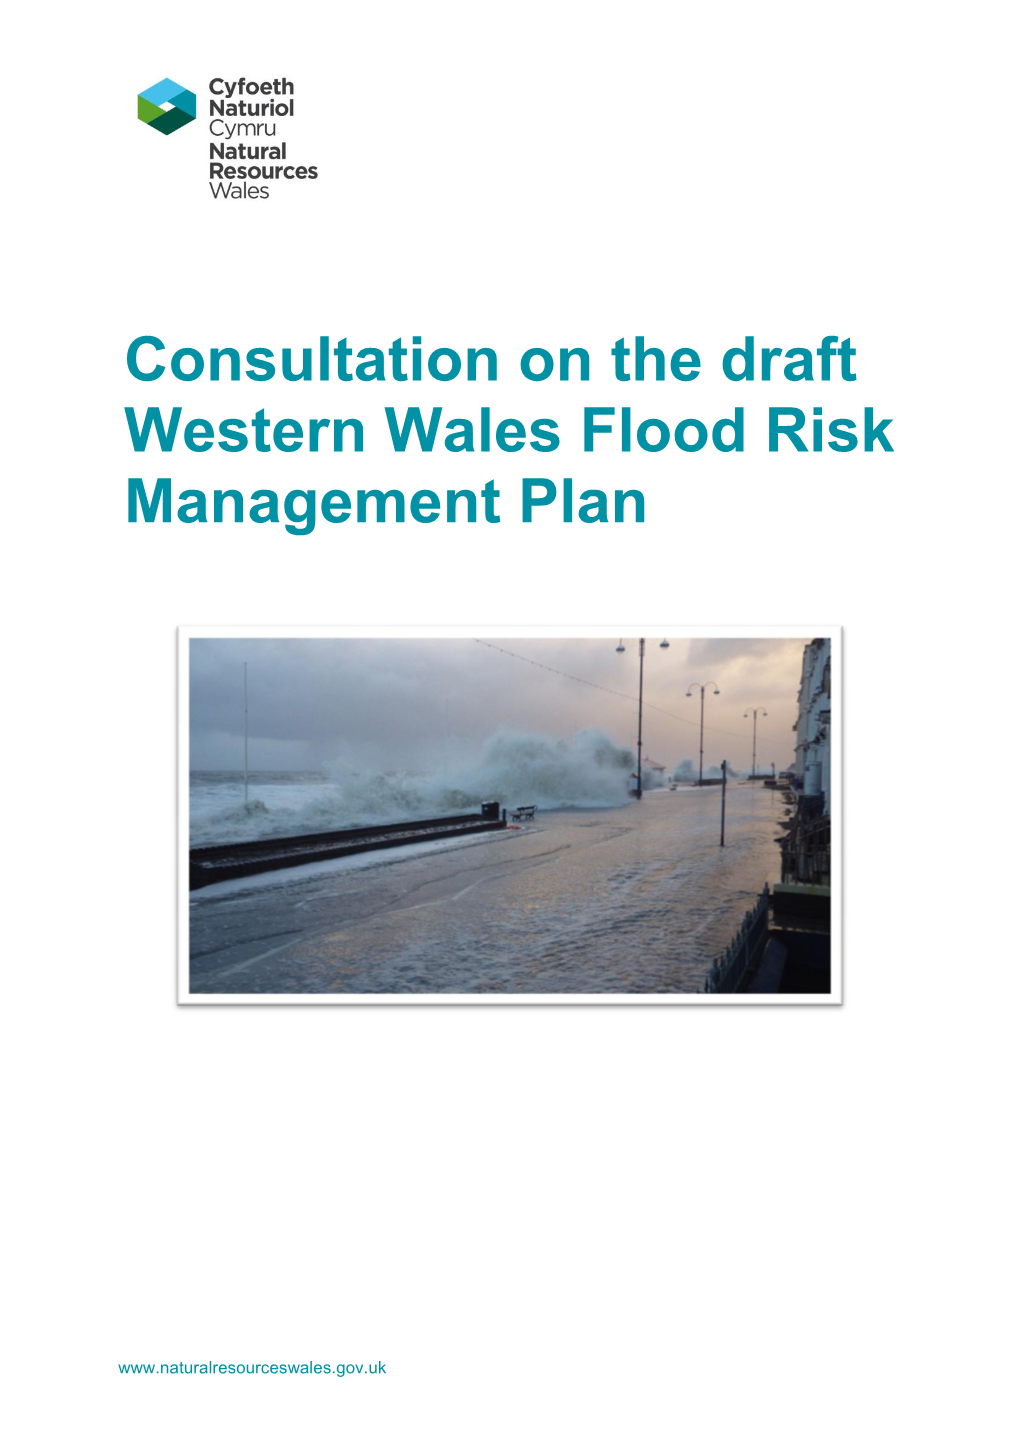 Consultation on the Draft Western Wales Flood Risk Management Plan